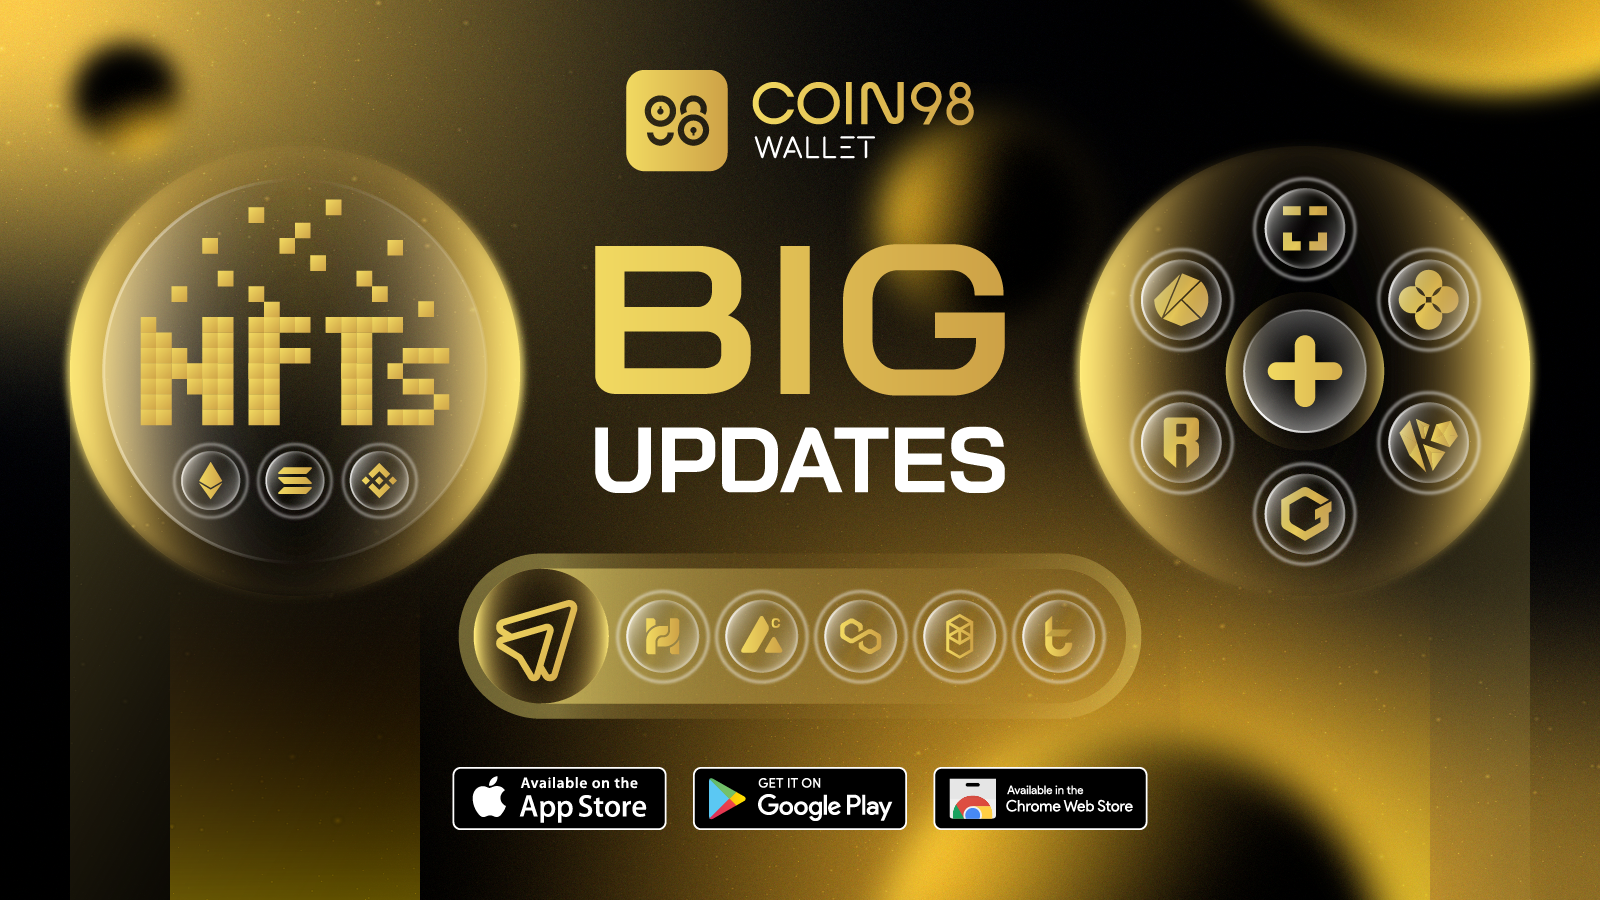 Coin98 Wallet marks the dawn of NFTs arrival and its new Blockchain horizon in the latest version